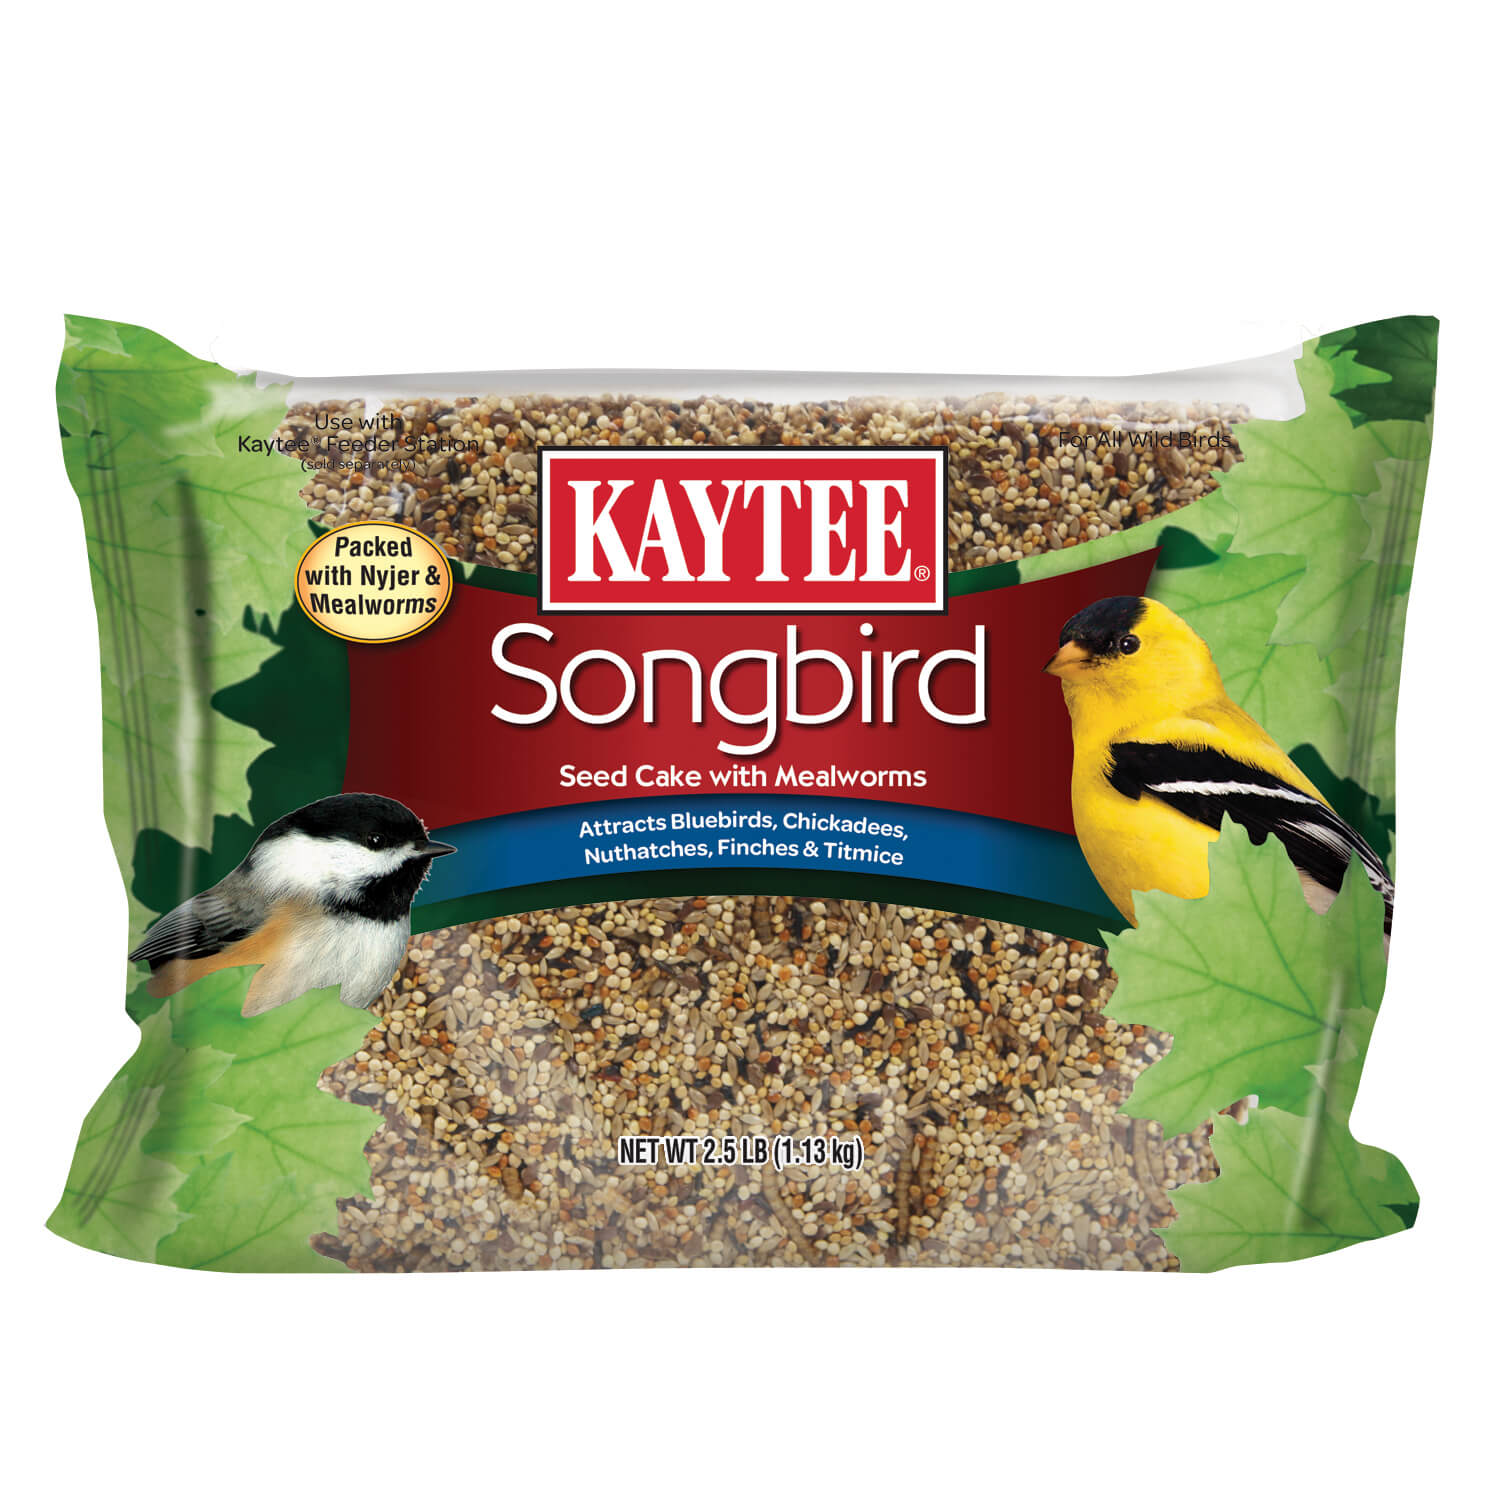 Kaytee Songbird Seed Cake with Mealworms